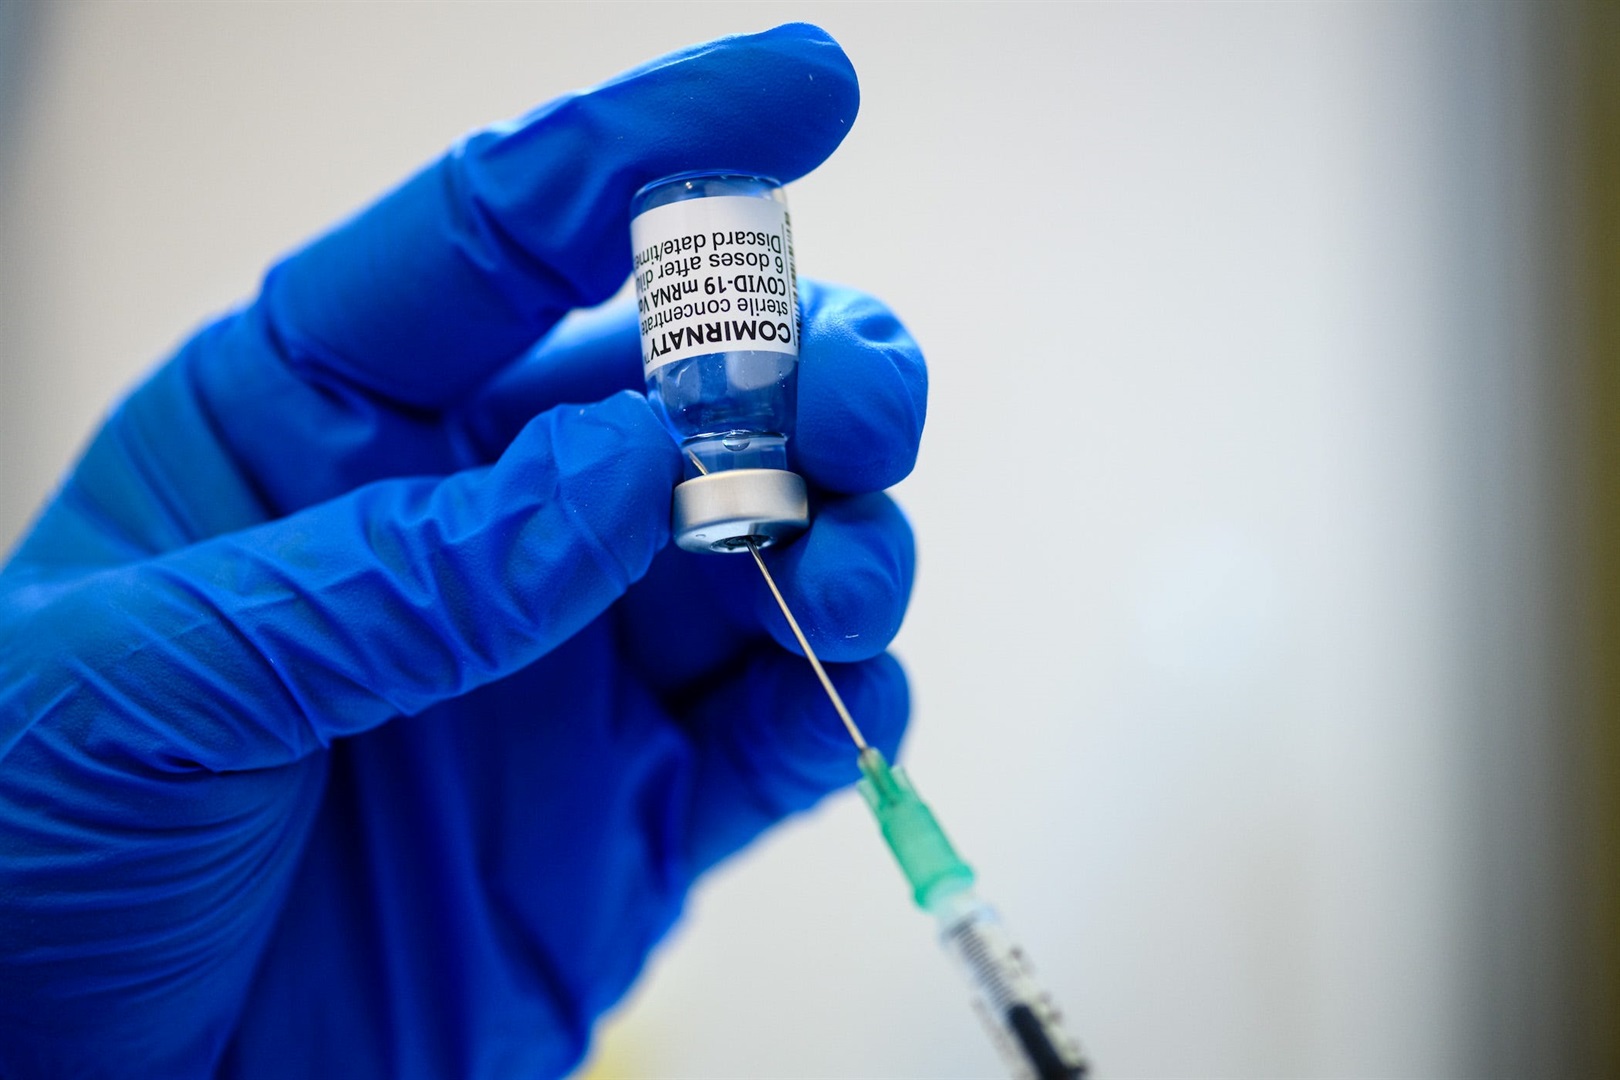 Botswana to fine or jail returning citizens who refuse Covid-19 vaccination | News24